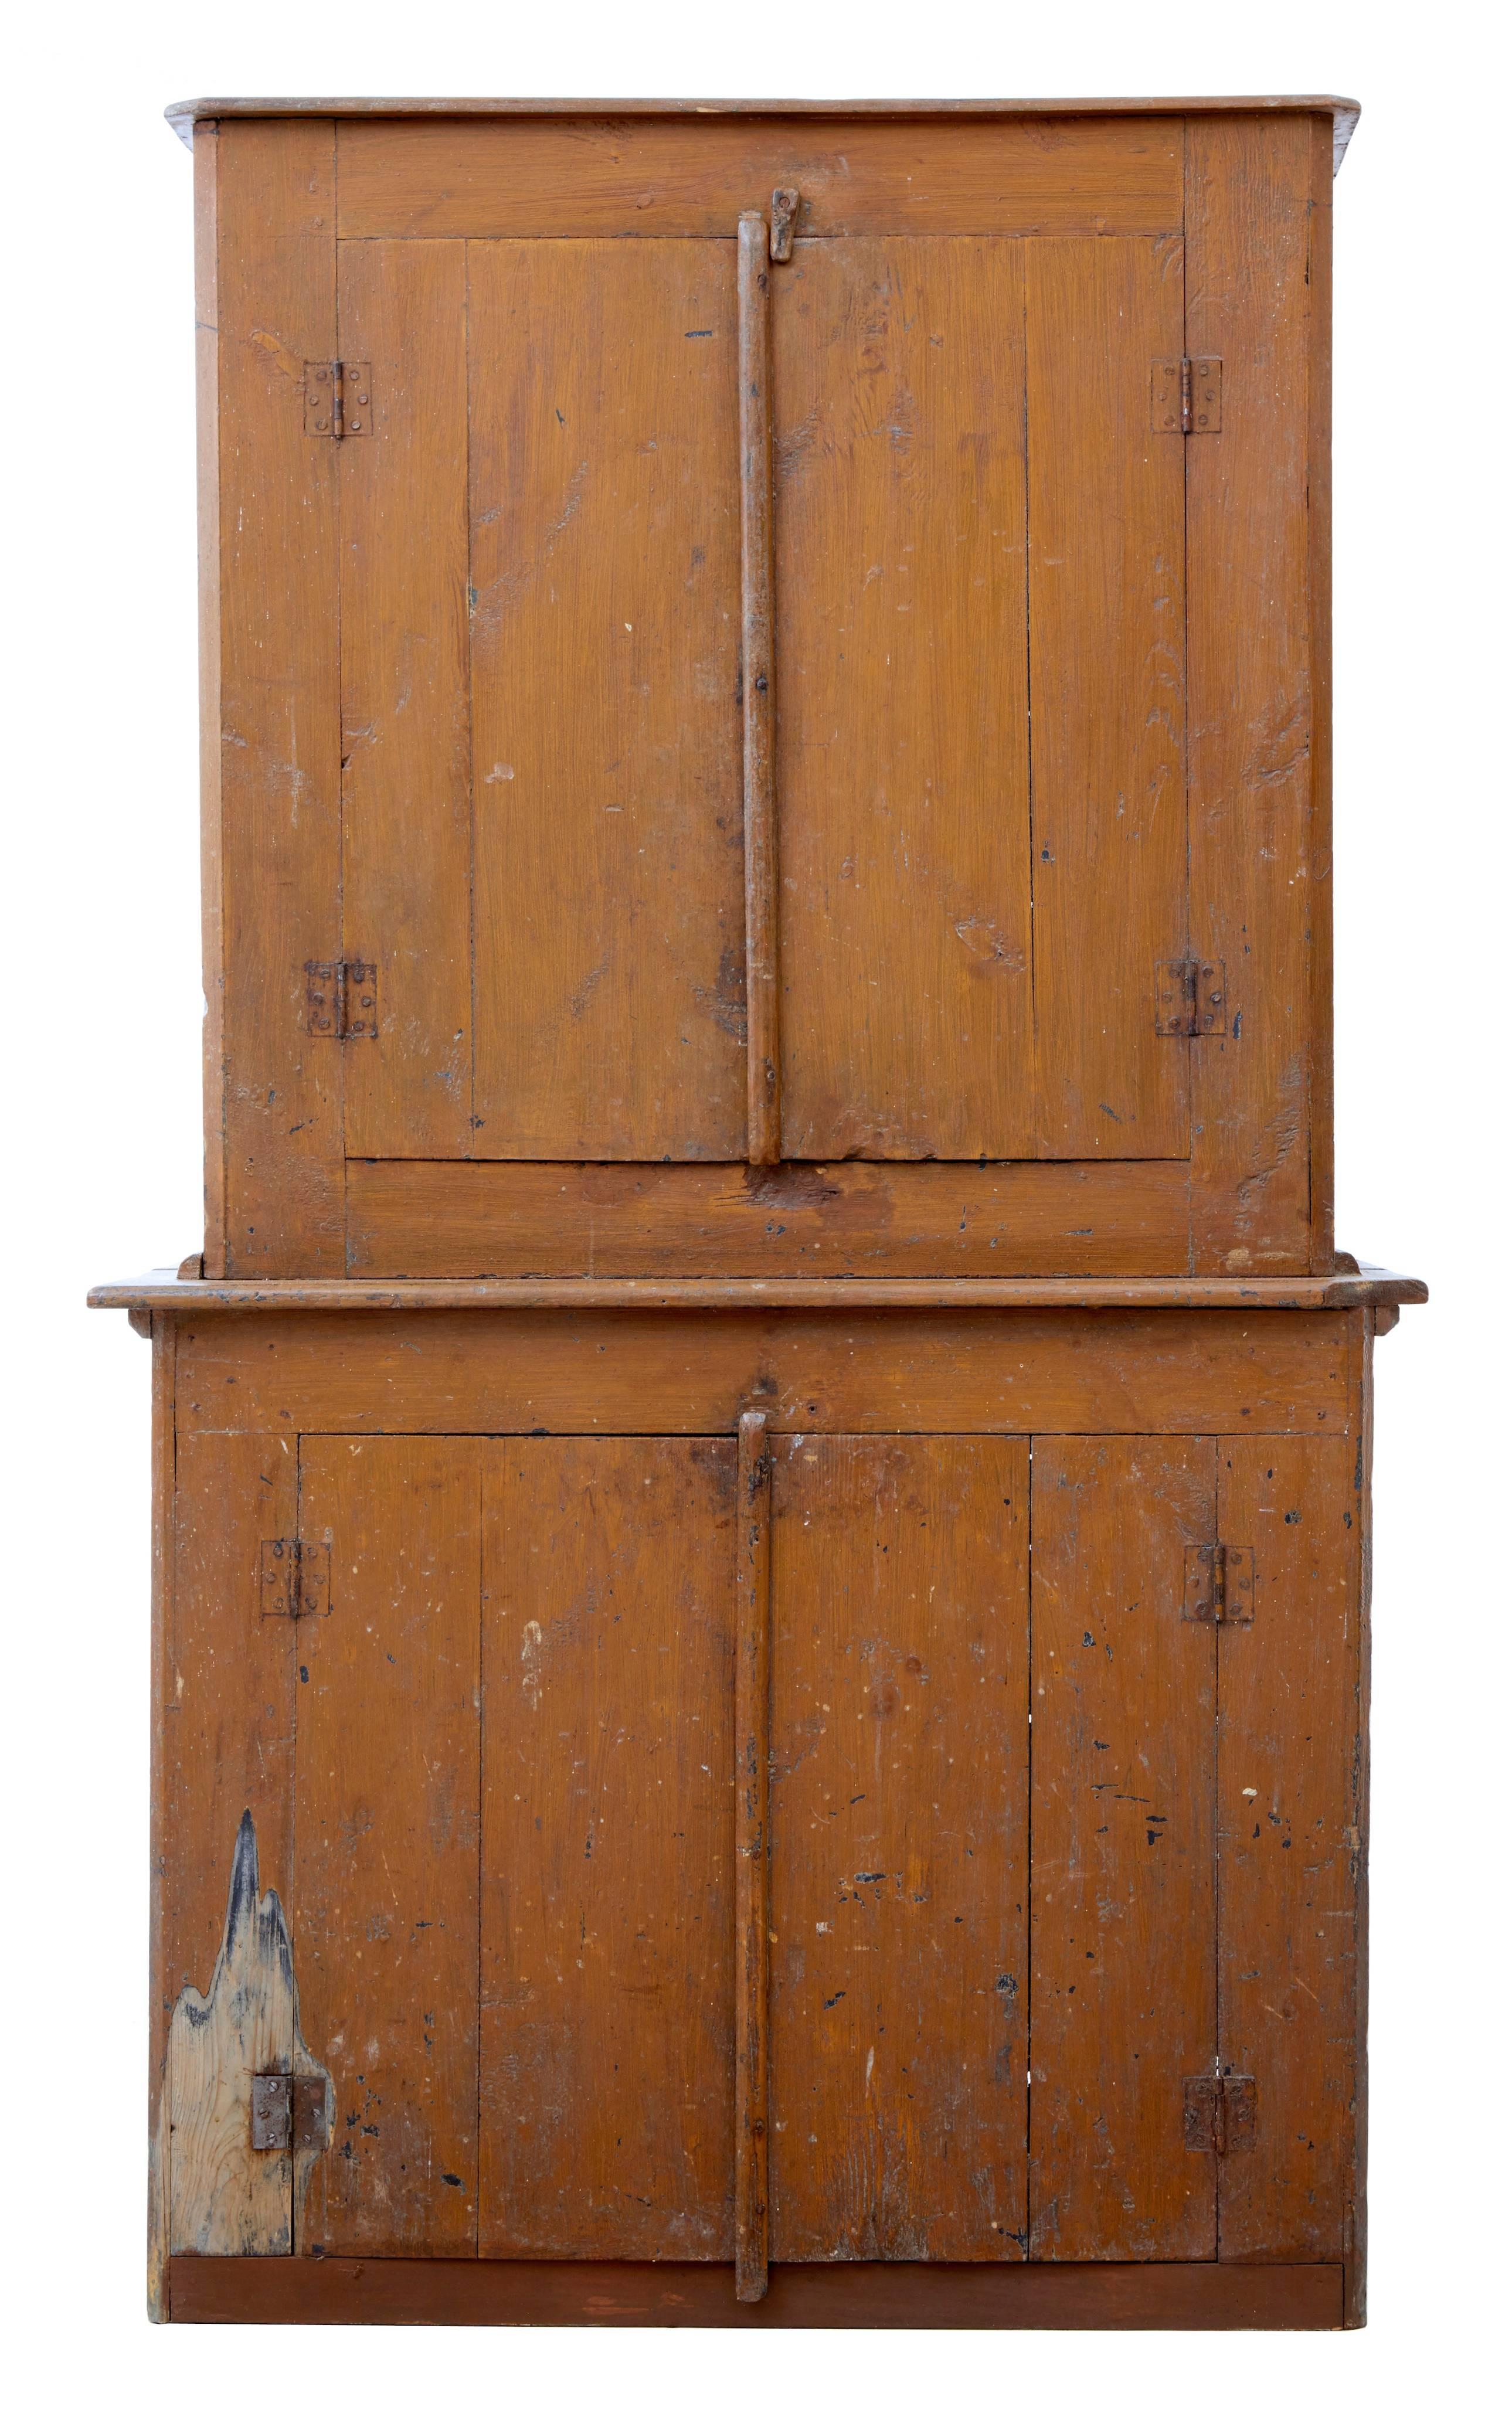 Traditional Swedish kitchen cupboard, circa 1860.
Here we offer a rural piece of furniture.
Naive in construction this two part cupboard is full of charm.
Top section with two shelves and bottom section with a single shelf.
Painted many years